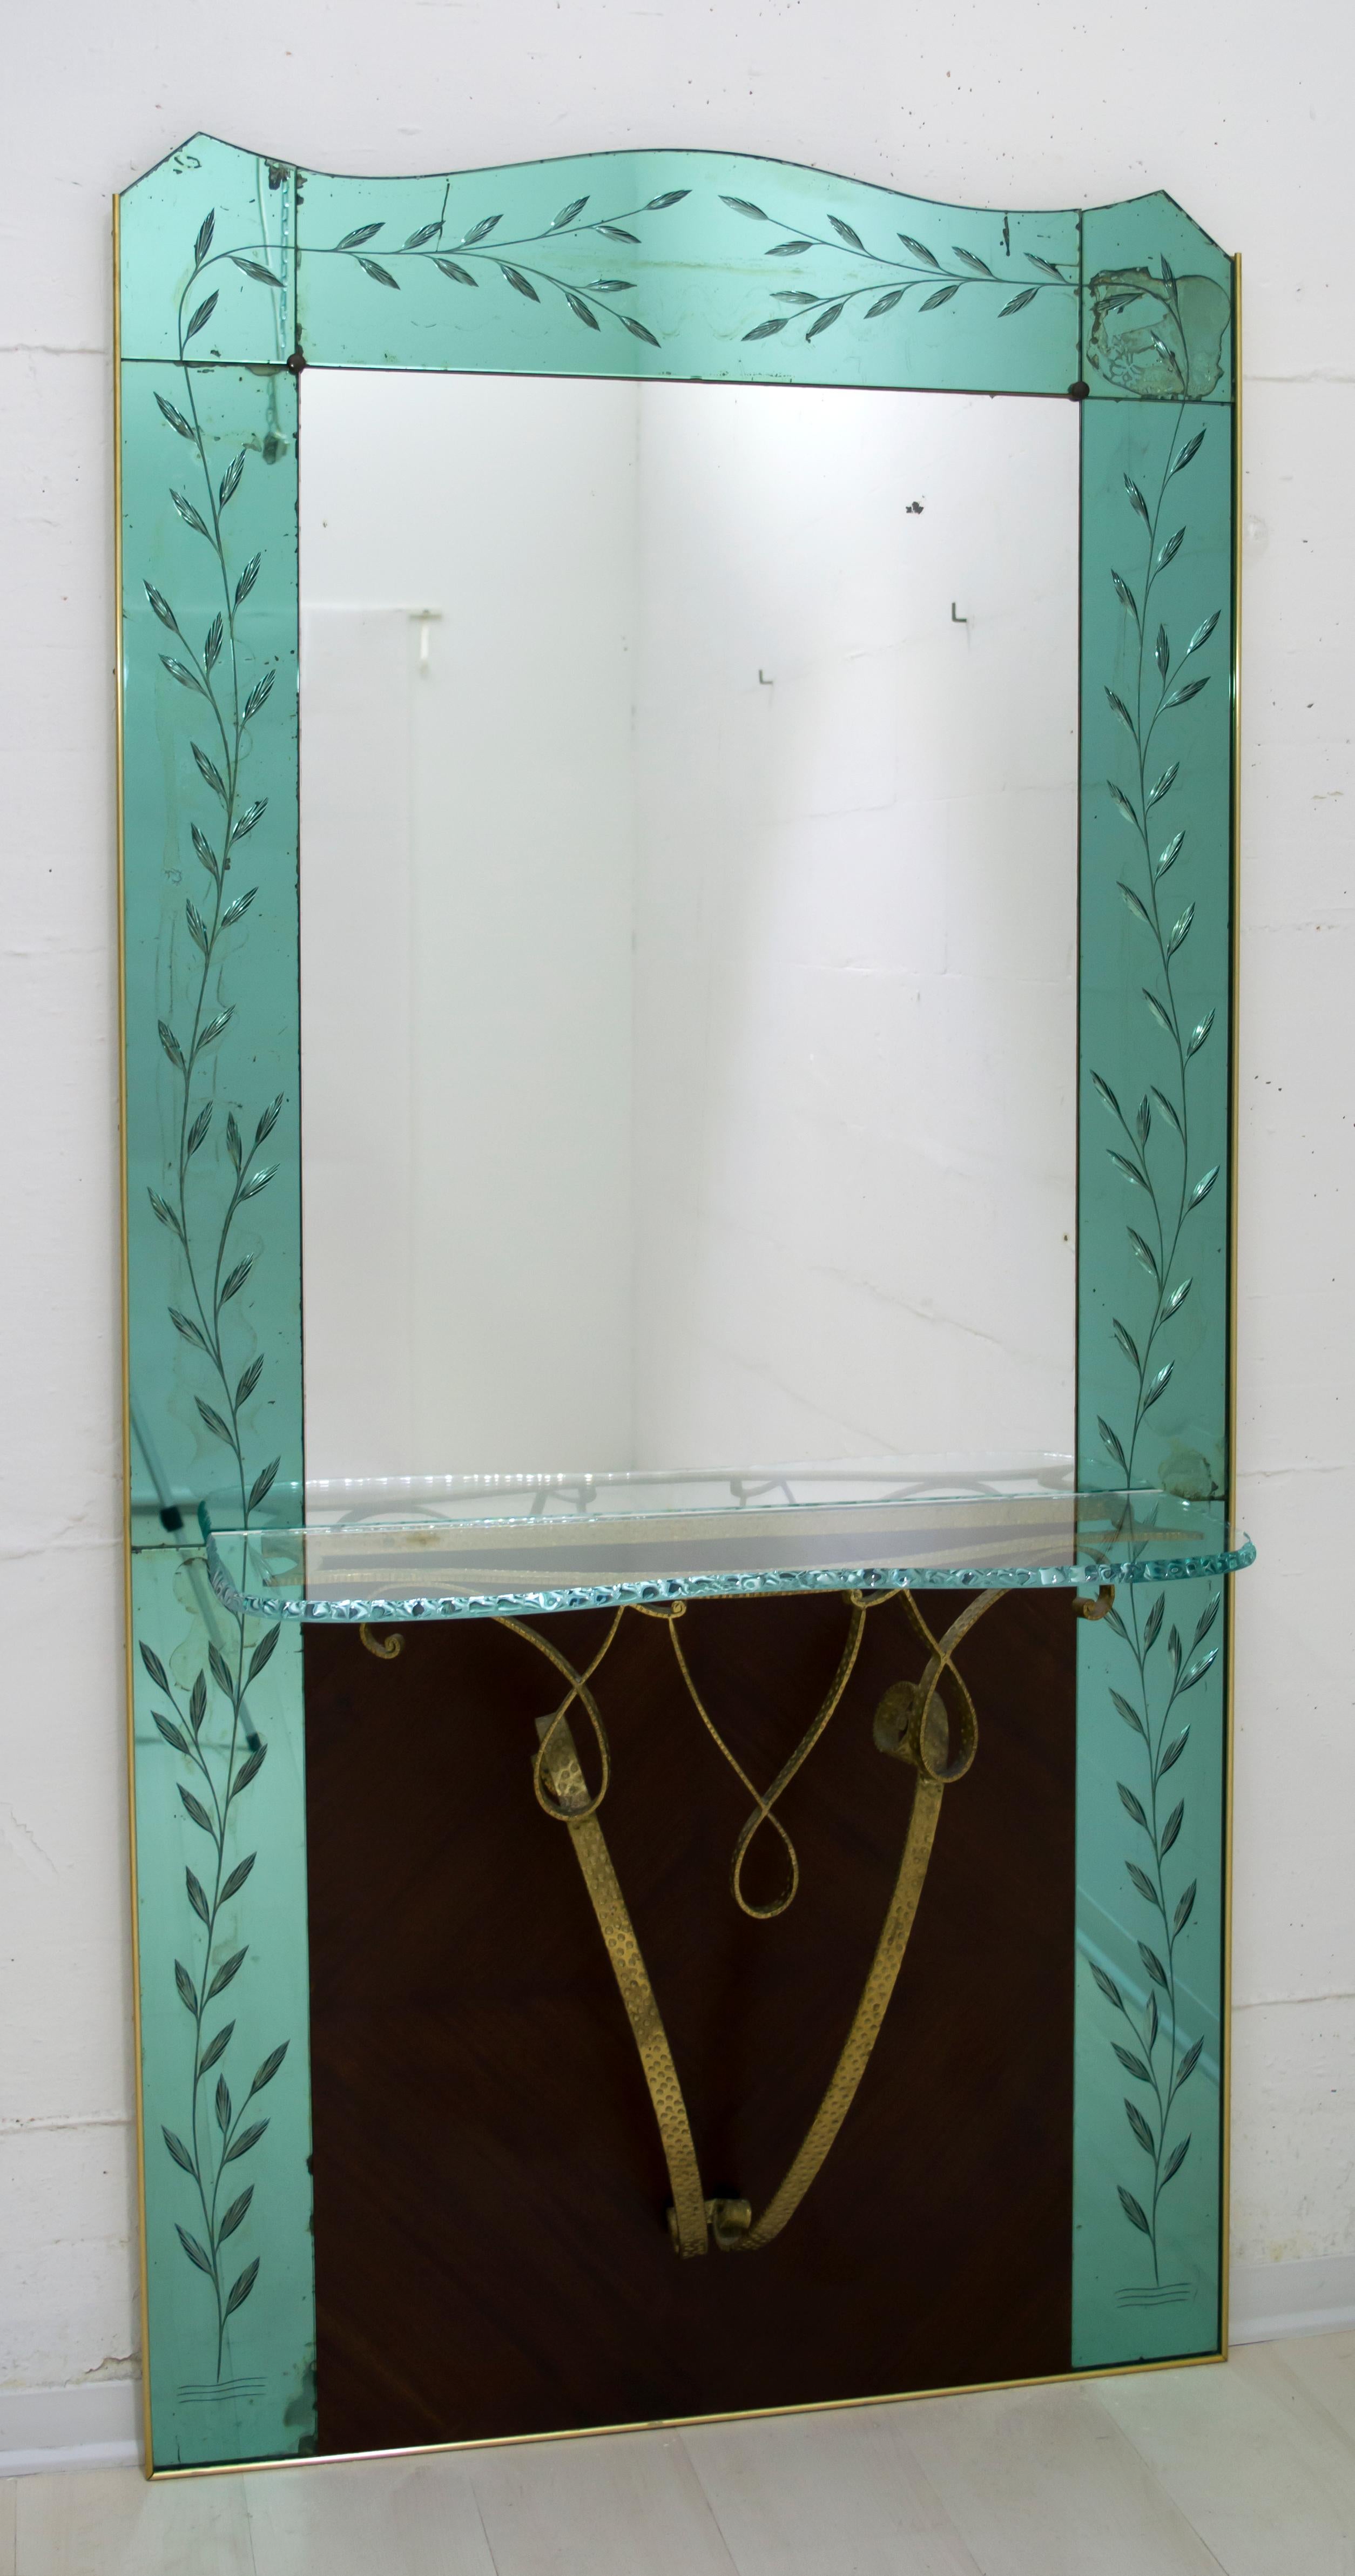 Beautiful entrance mirror with consol, sophisticated, elegant, designed by Pier Luigi Colli
The mirror, even if it has stains due to time, remains beautiful, gives a touch of authenticity and originality, it is almost entirely handmade in Turin,